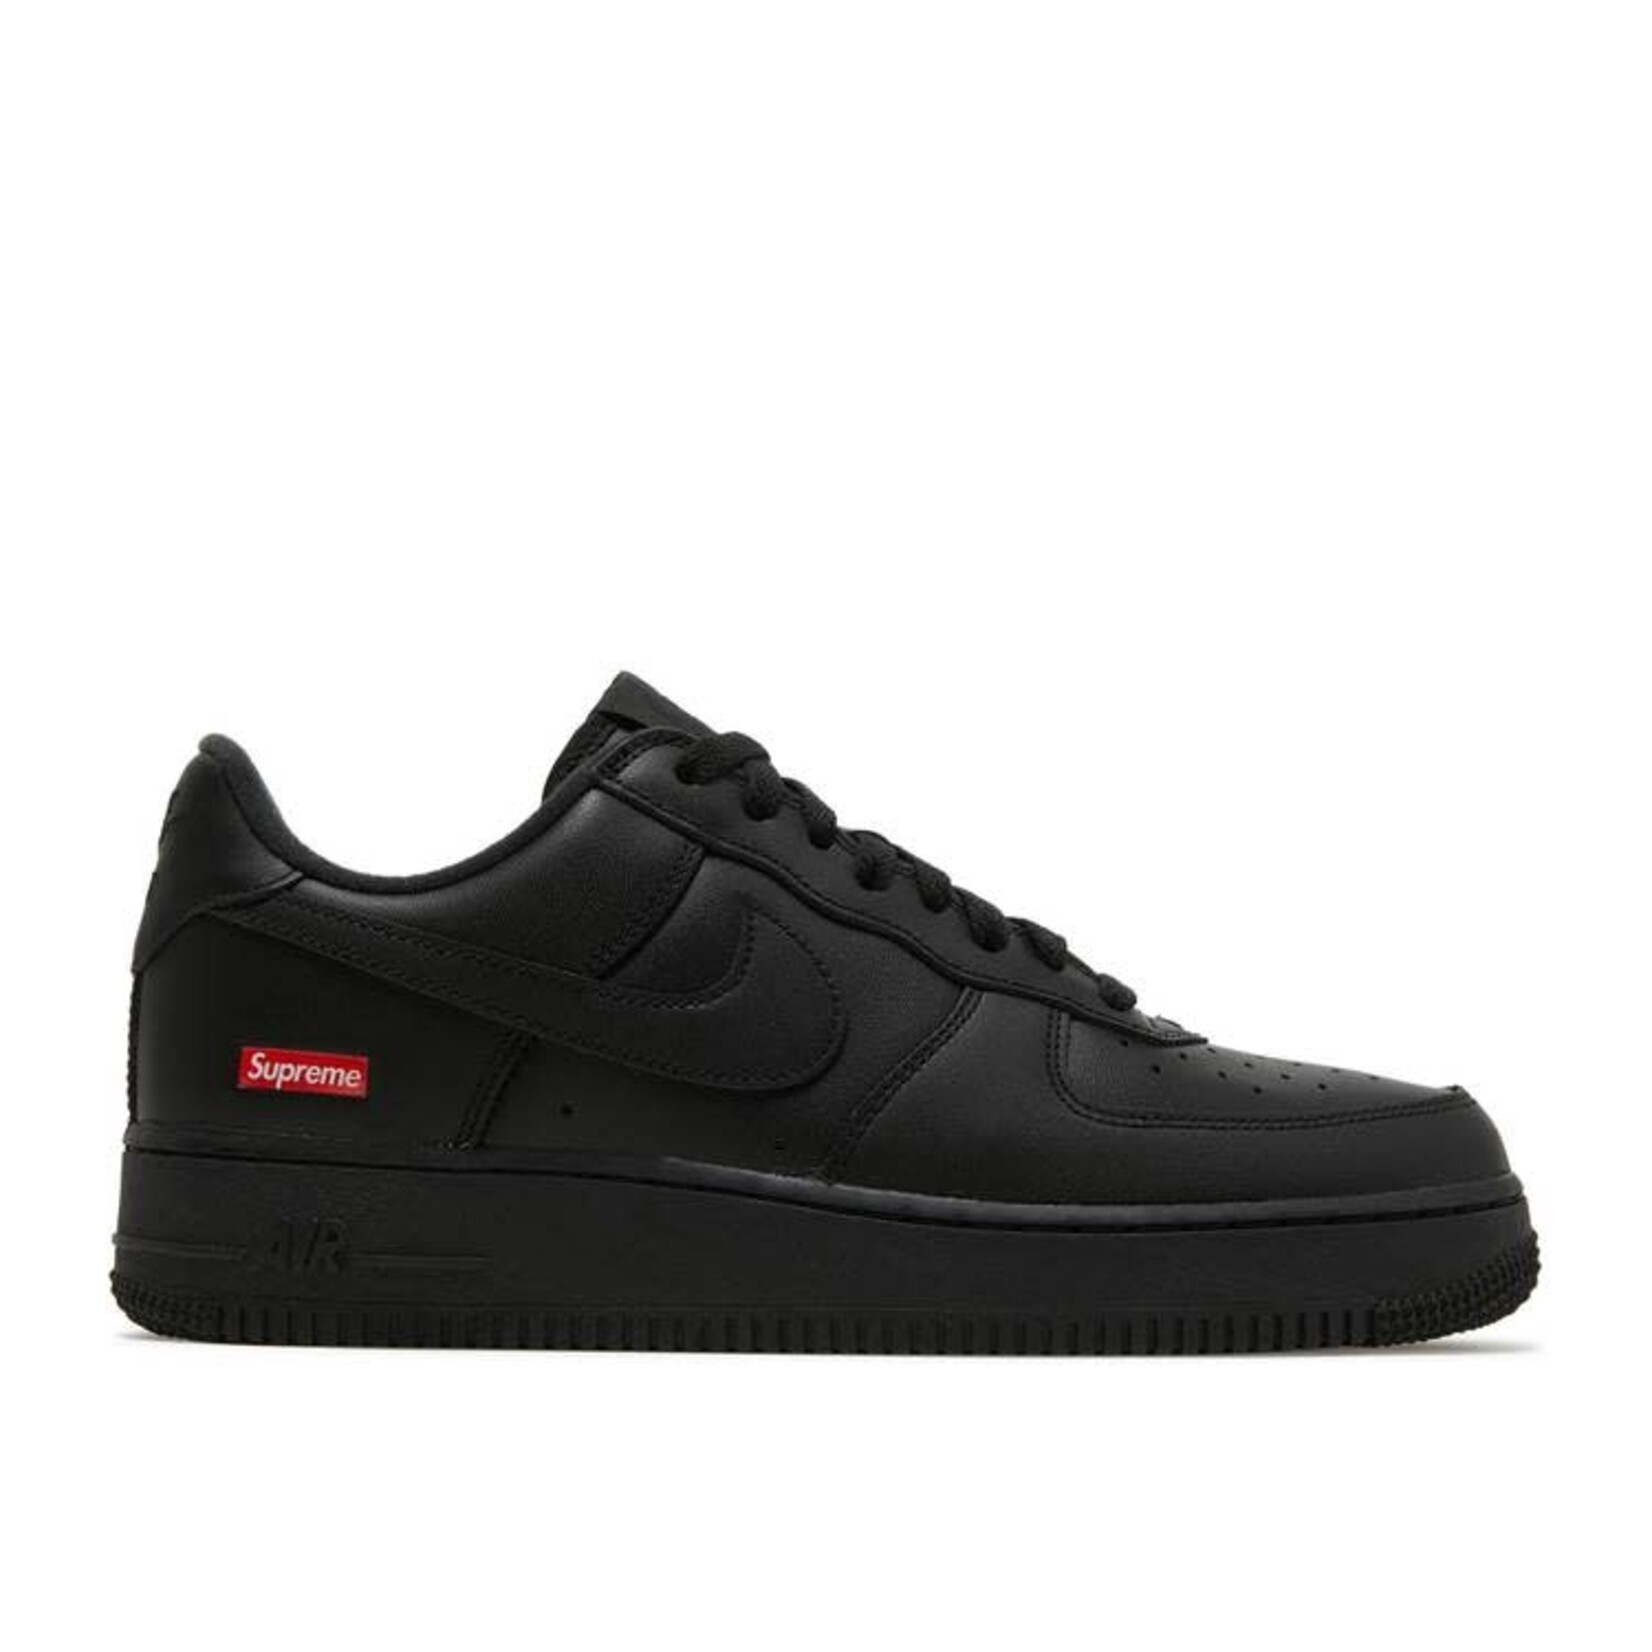 Nike Nike Air Force 1 Low Supreme Black Size 8.5, DS BRAND NEW